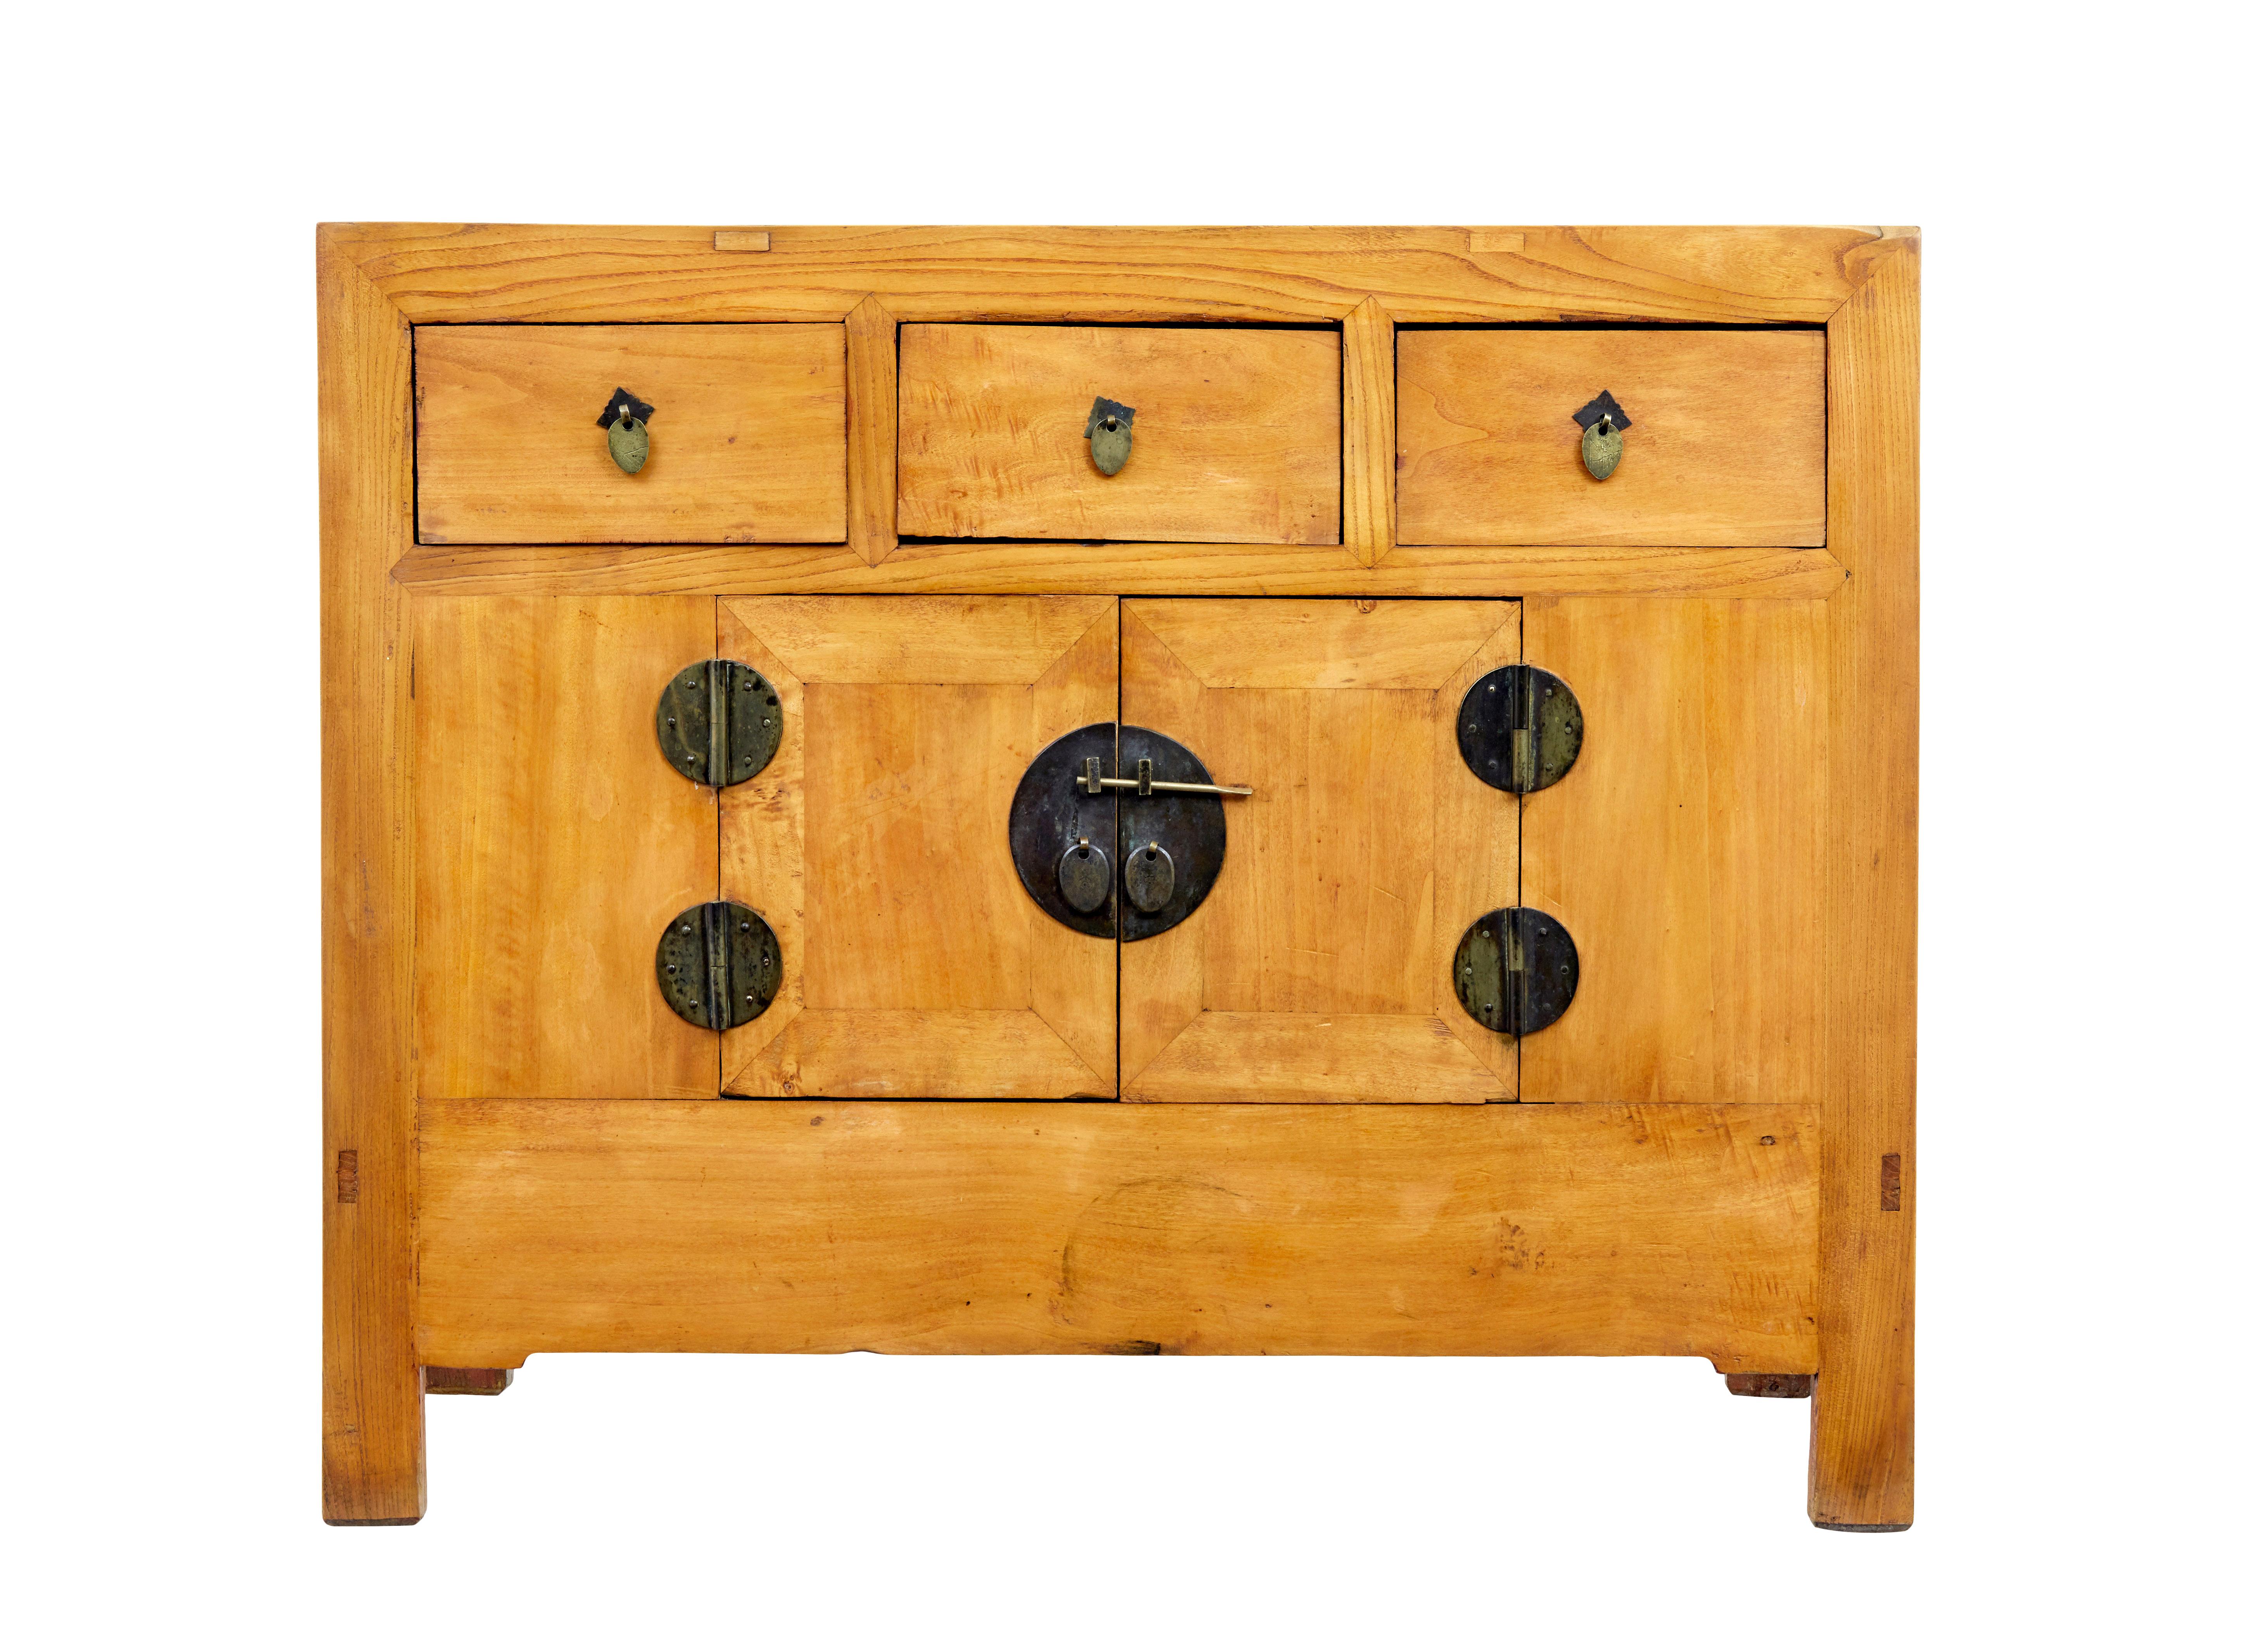 Late 19th century Chinese small sideboard In Good Condition For Sale In Debenham, Suffolk